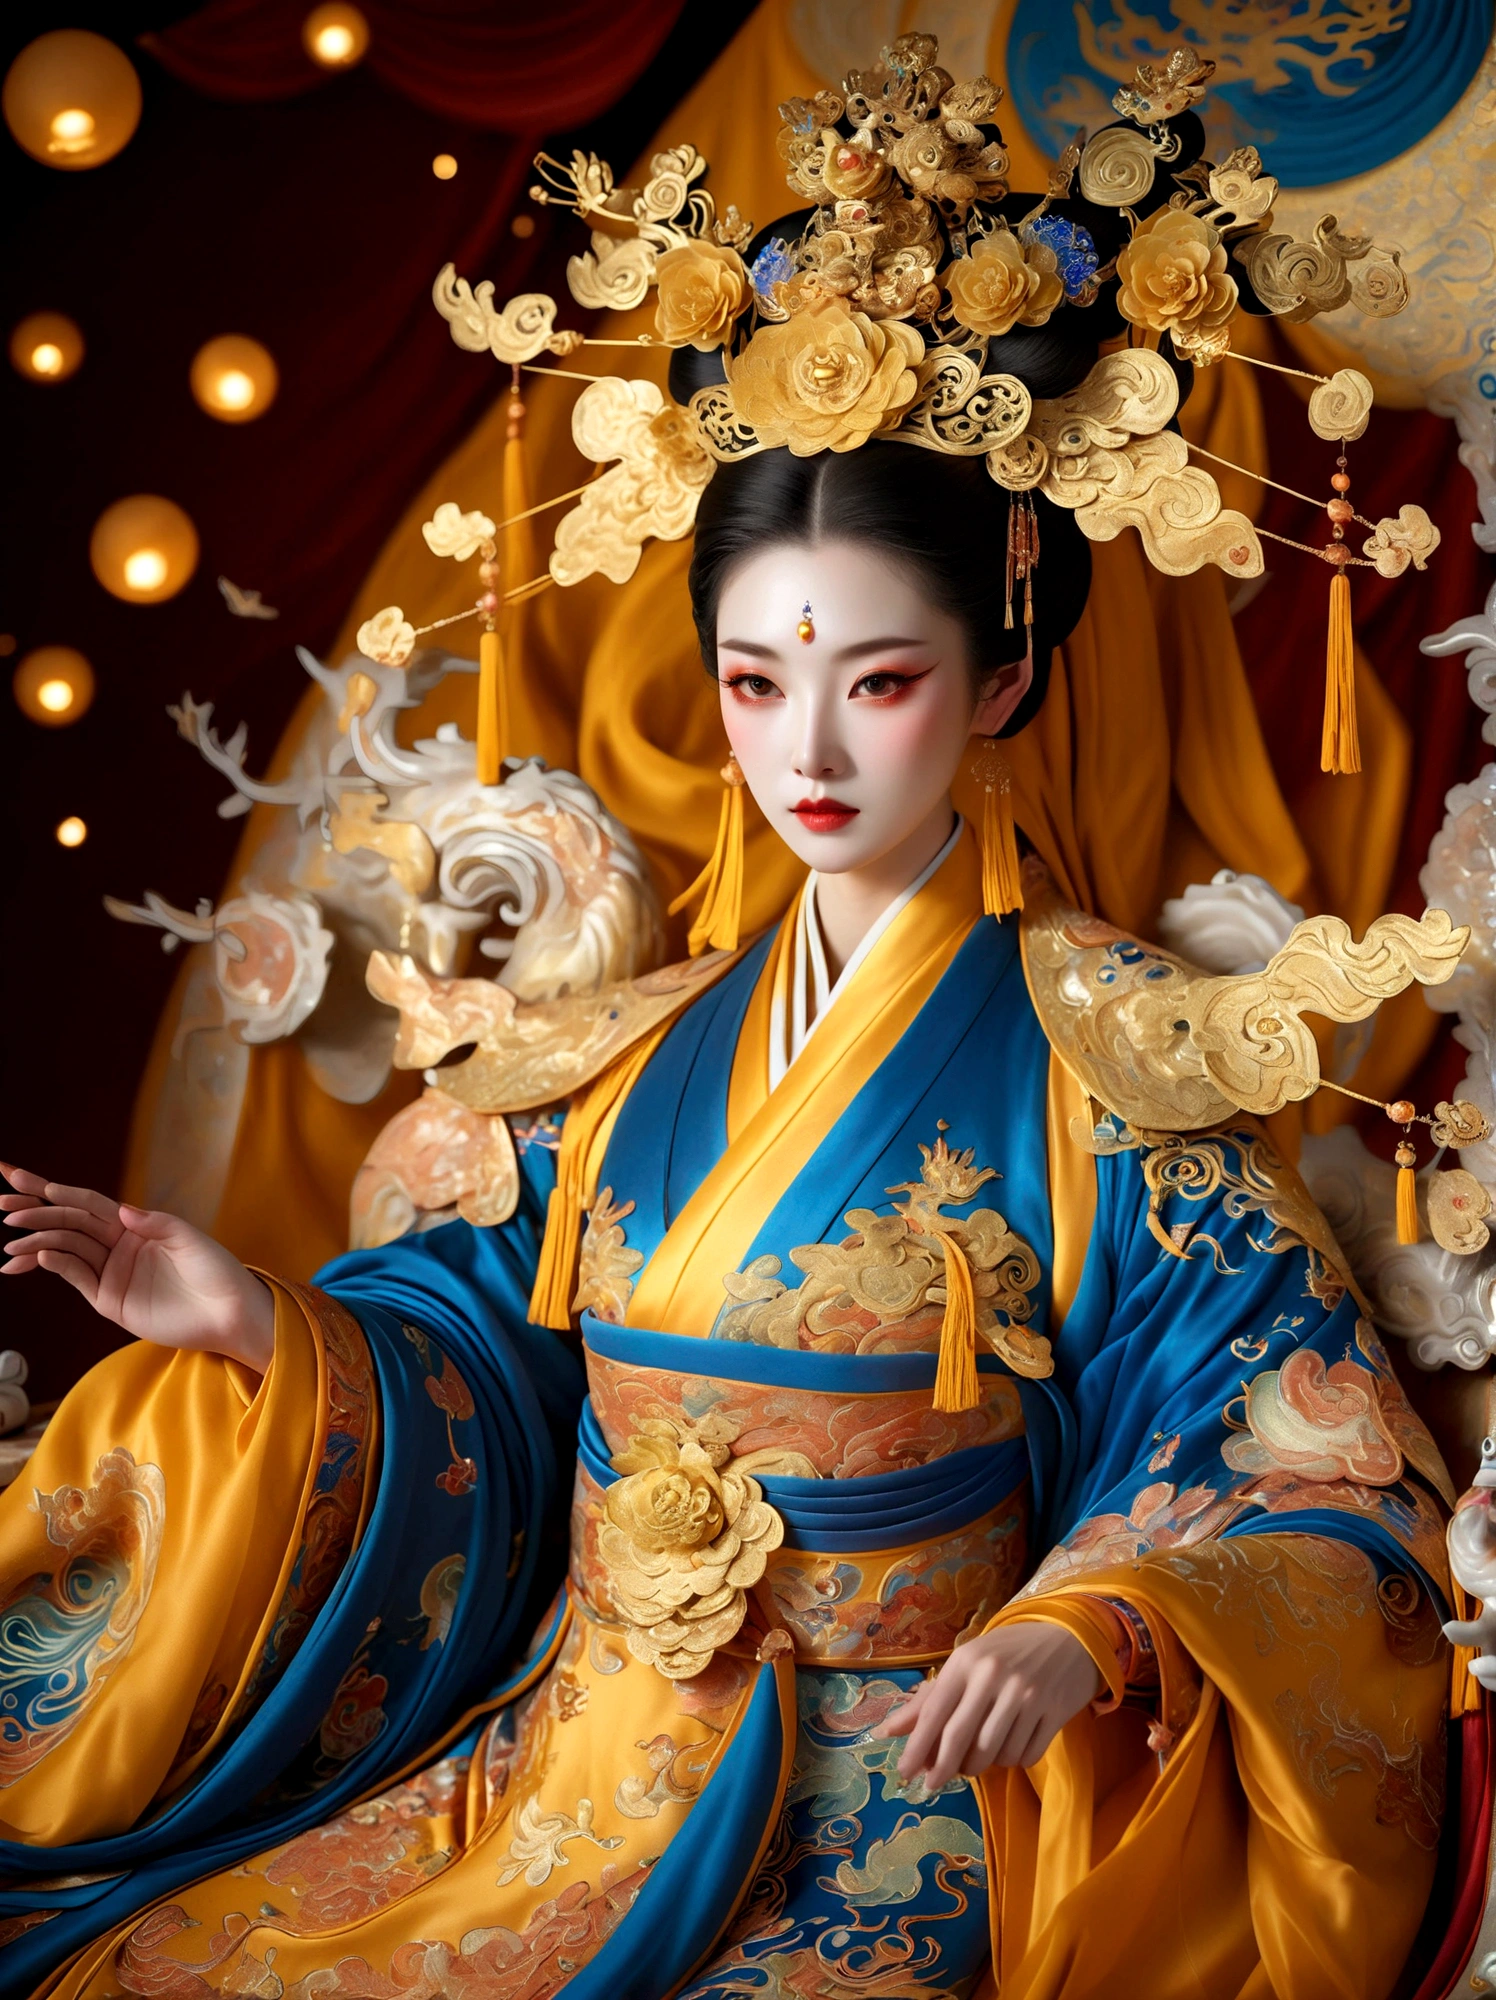 (Empress Wu Zetian of the Tang Dynasty of China:1.3)，A royal figure in a lavish robe, adorned with a large crown, is seated on a throne, The setting is otherworldly and surreal, located in the vast expanse of space, The figure is perched on a miniature planet that's enveloped entirely by the rich fabric of the robe, reflecting an element of royal extravagance